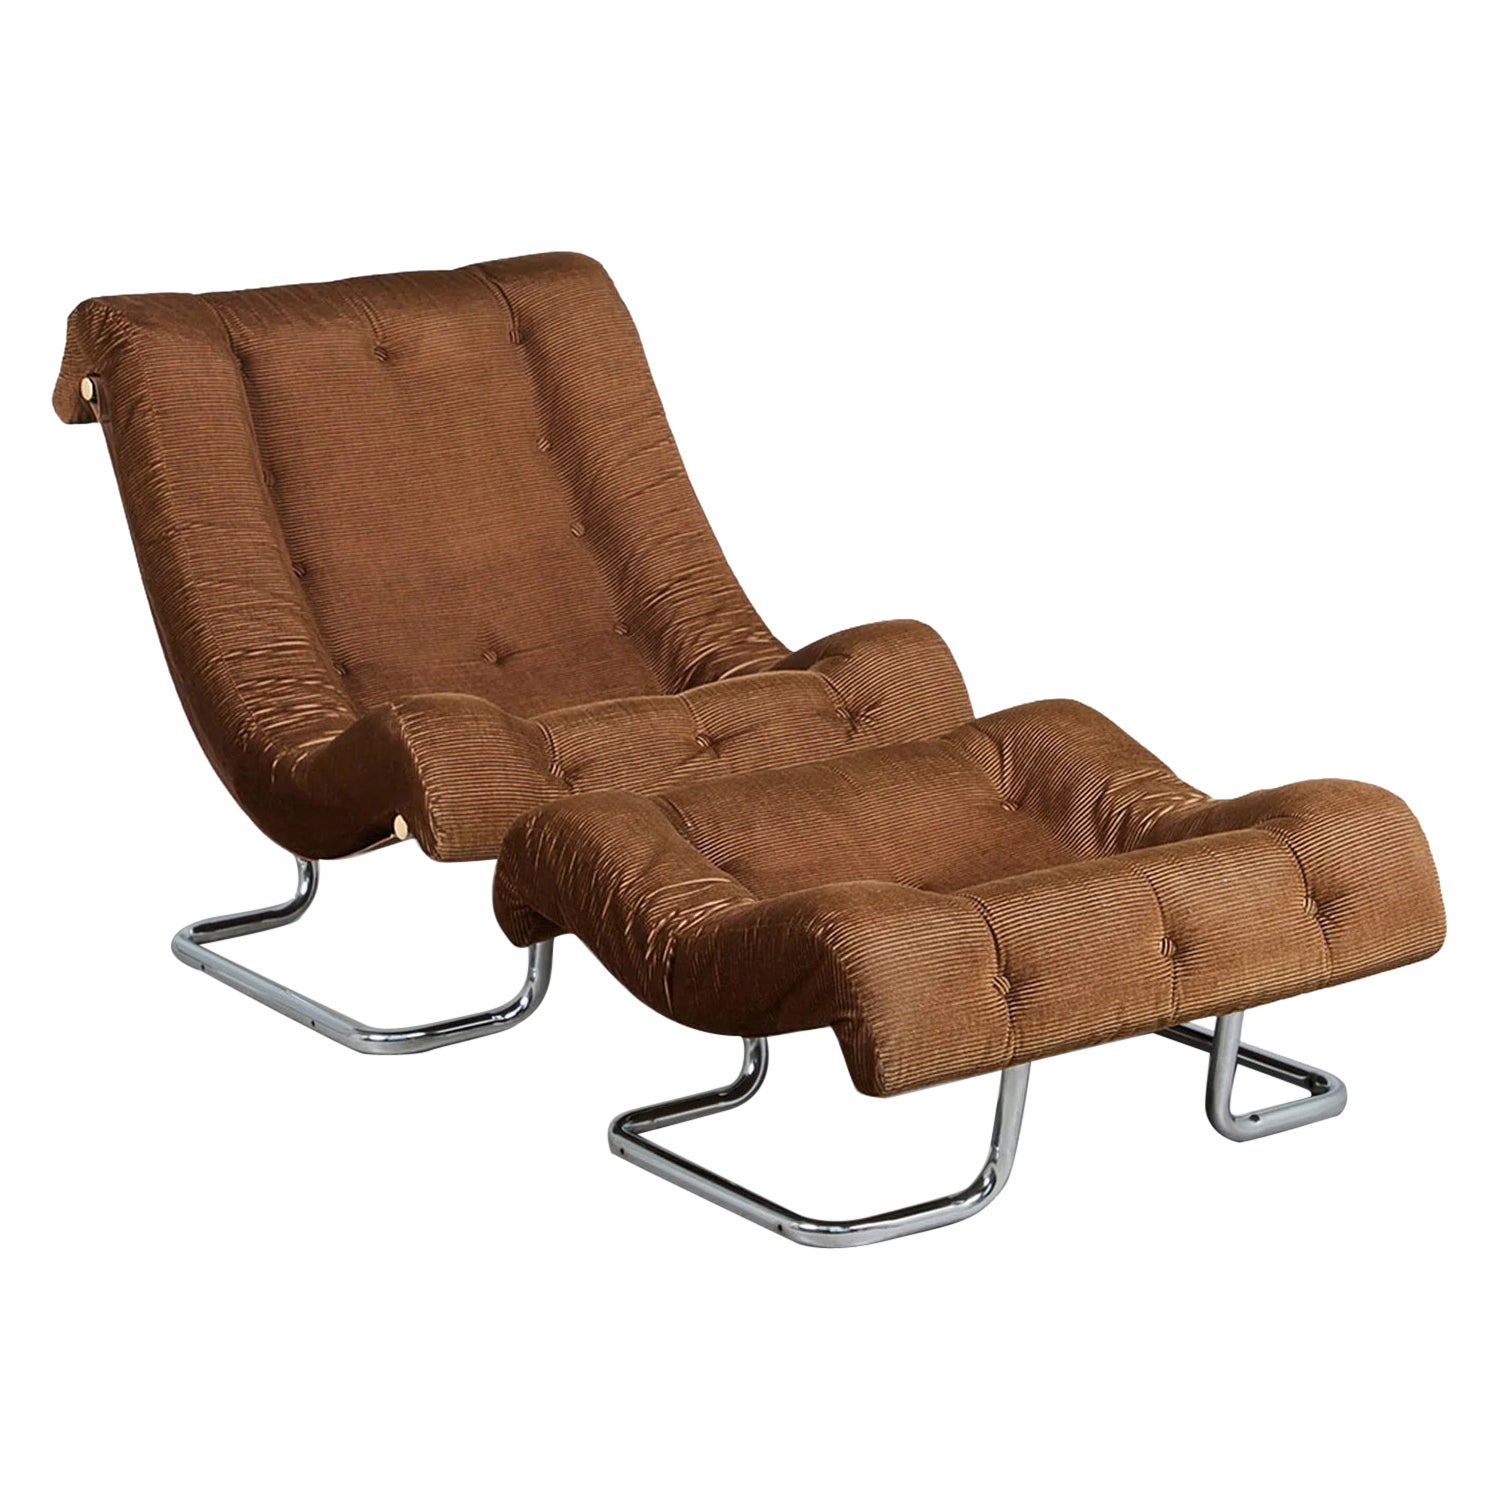 "Formula" lounge chair and ottoman by ruud ekstrand & christer norman For Sale